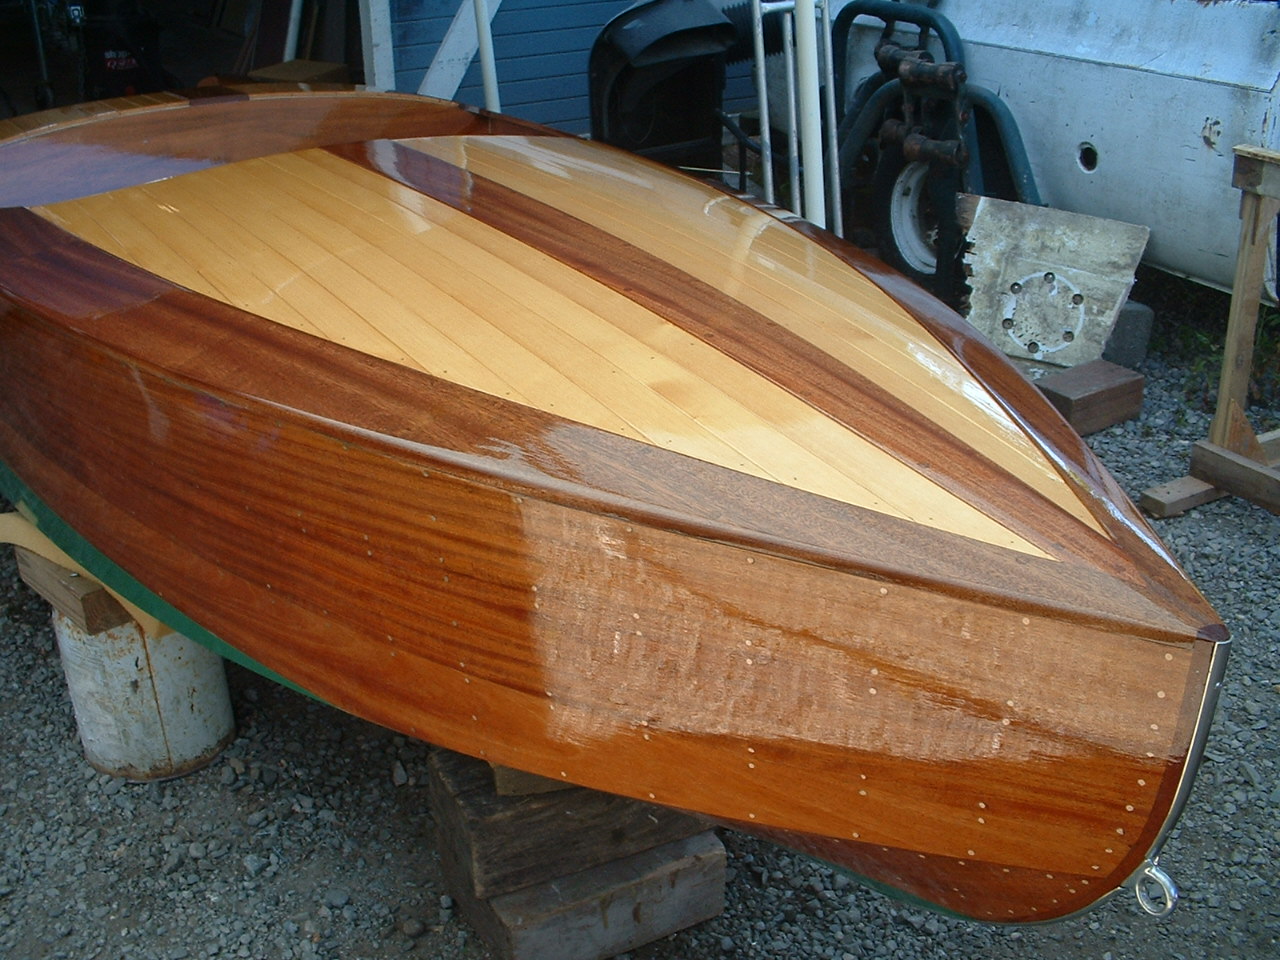 Wood Planning: Looking for Homemade wood boat